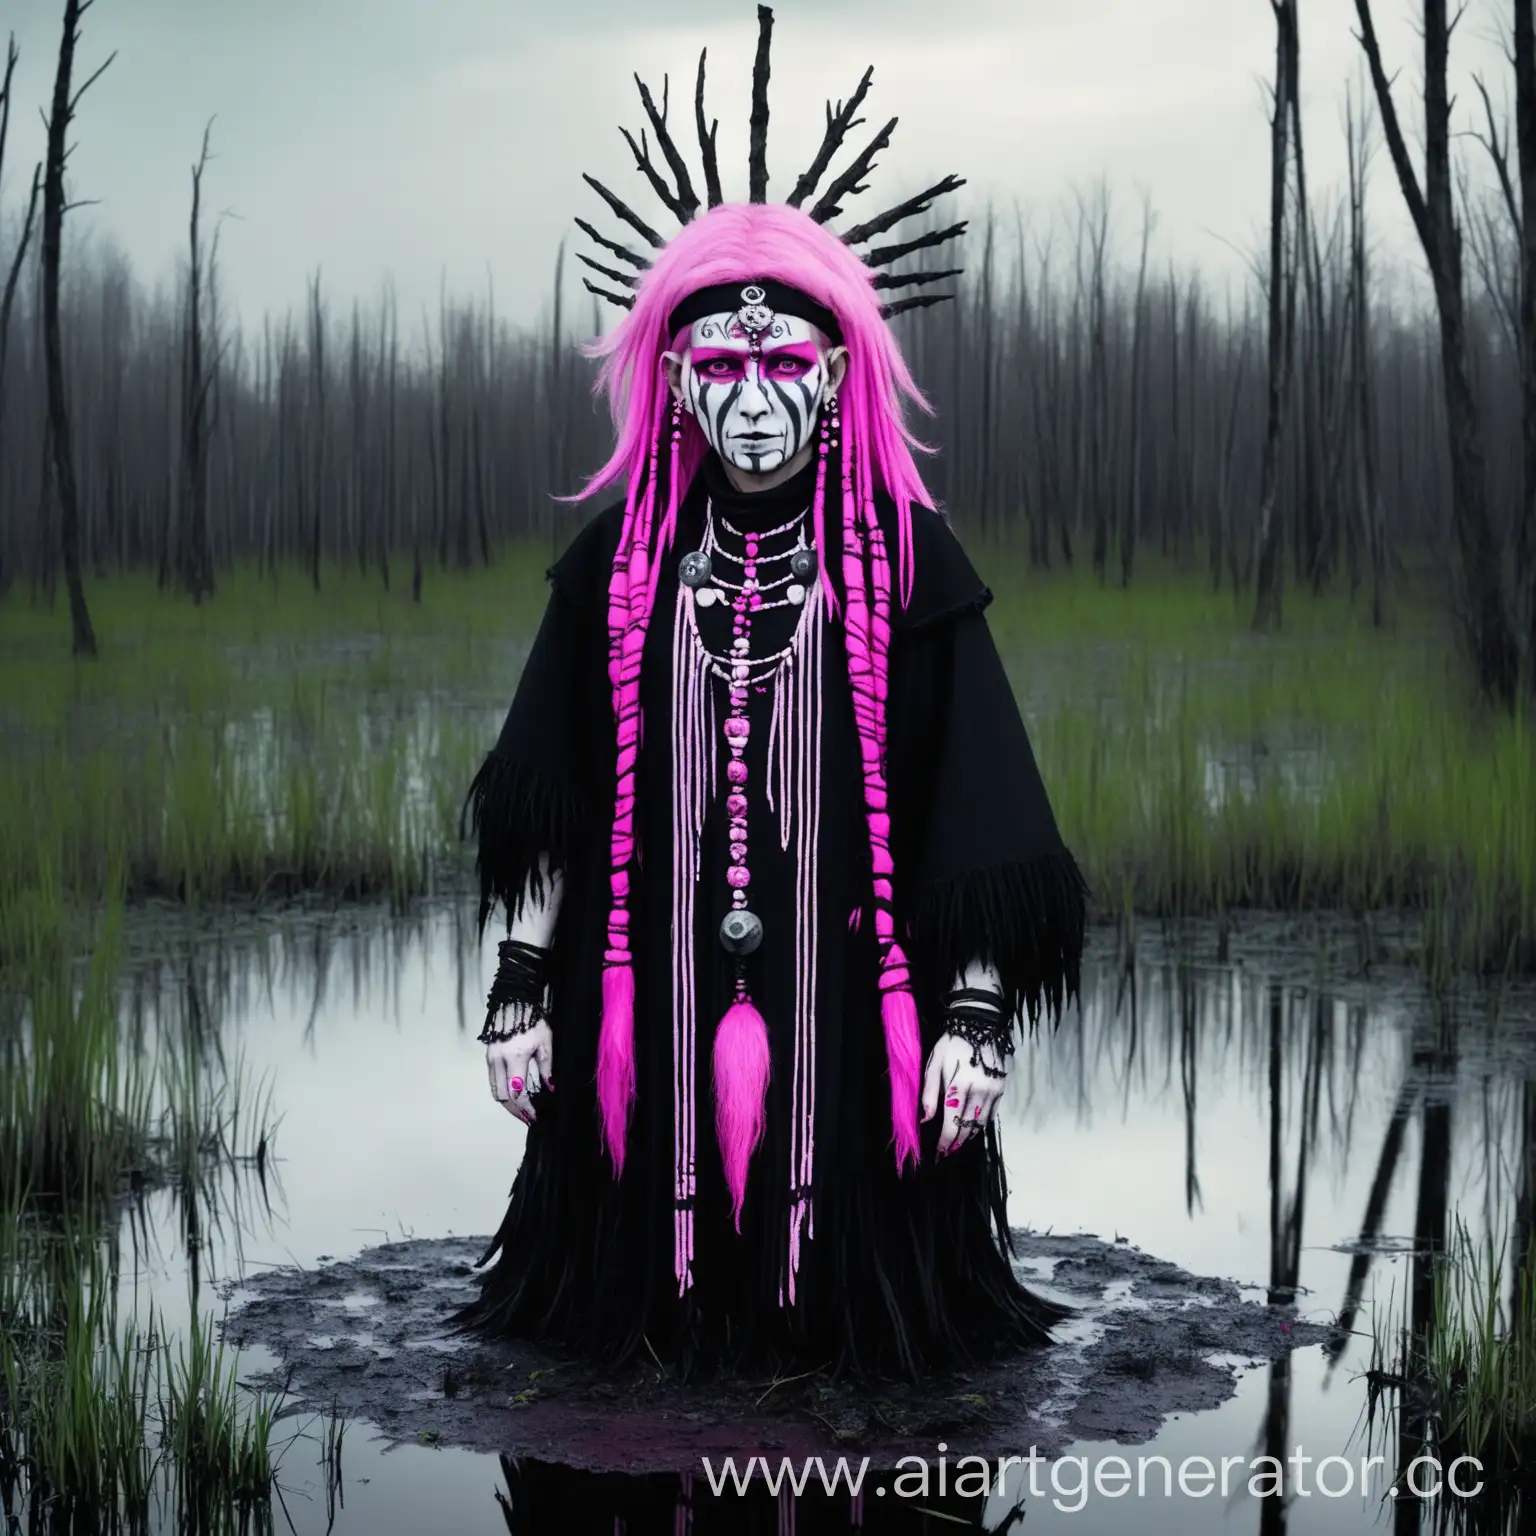 Chuvash-Shaman-with-Pink-Hair-in-Gothic-Style-on-the-Swamp